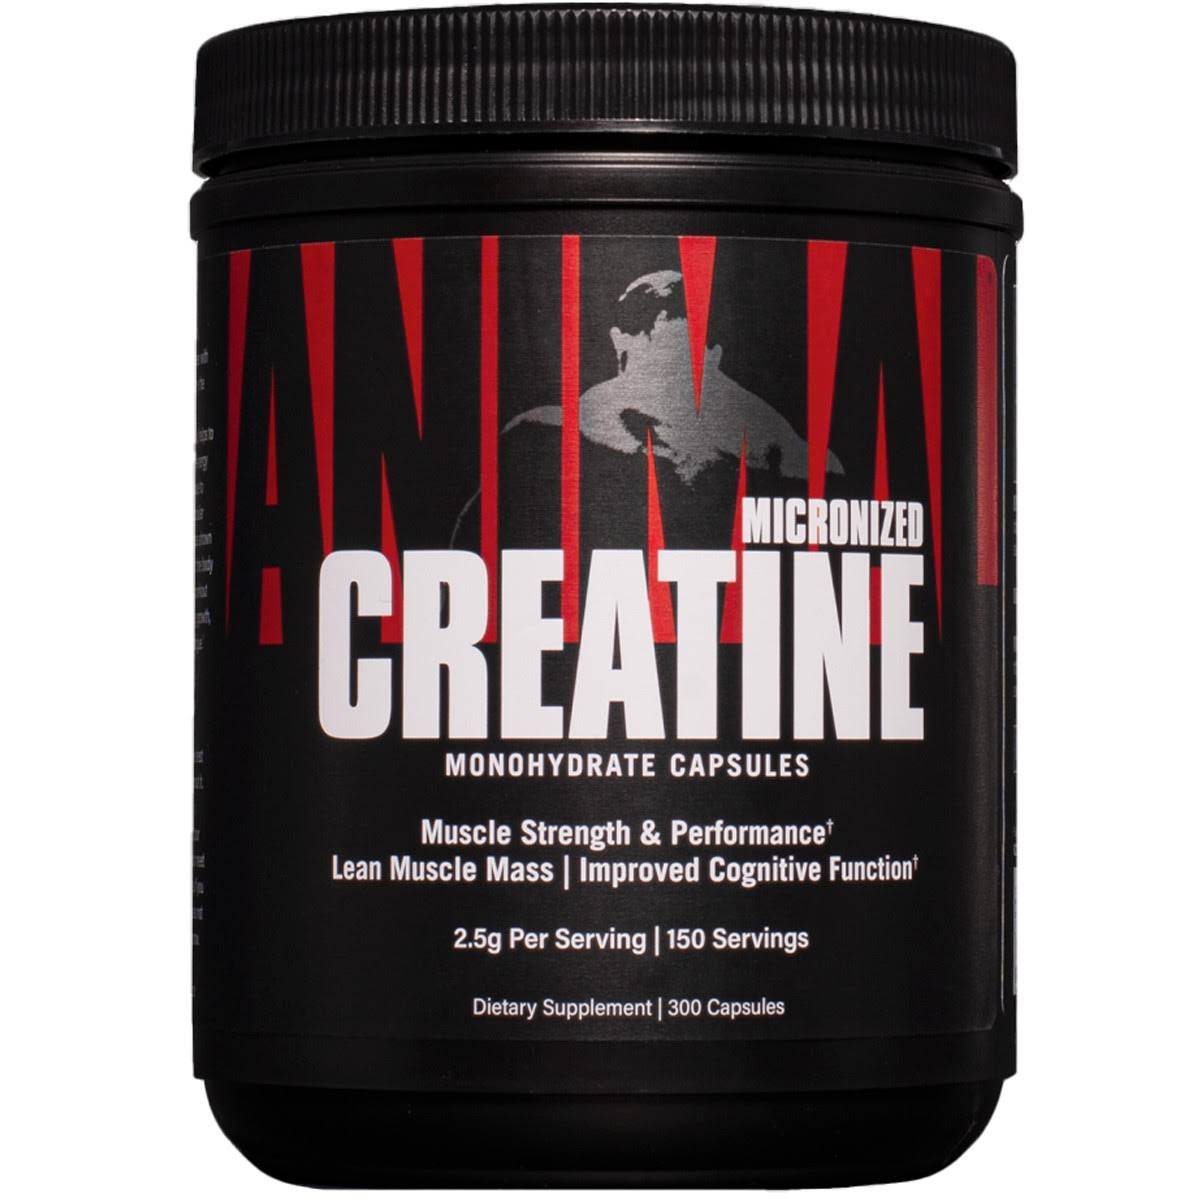 Animal Micronized Creatine Monohydrate Capsules - 300 Caps, 2500mg Per Serving - Micronized Creatine Monohydrate For Muscle Growth, Strength, And